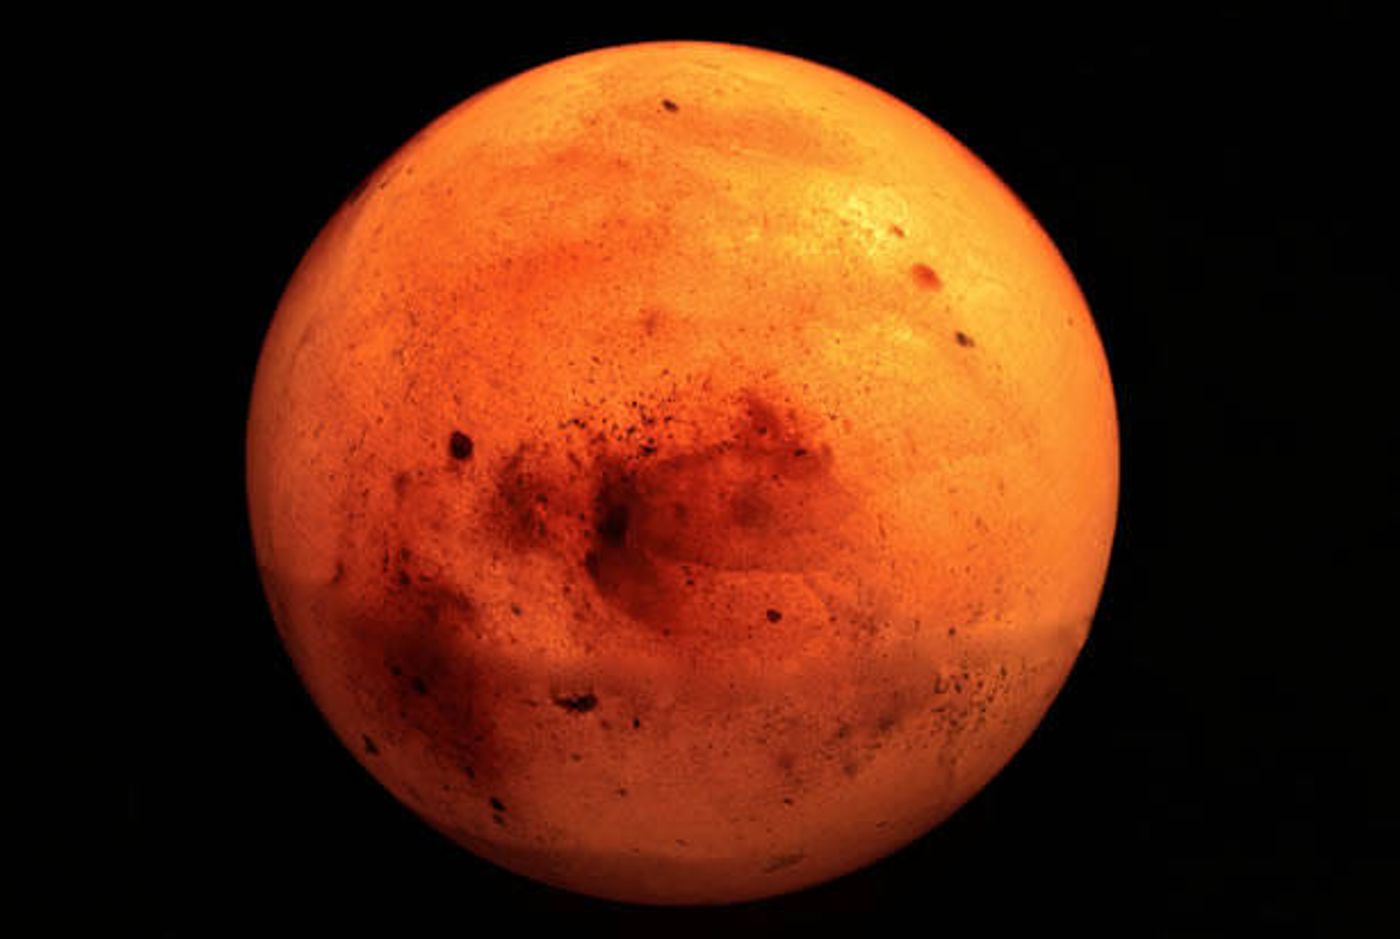 The red planet's habitable conditions may be becase of multiple asteroid and comet impacts.